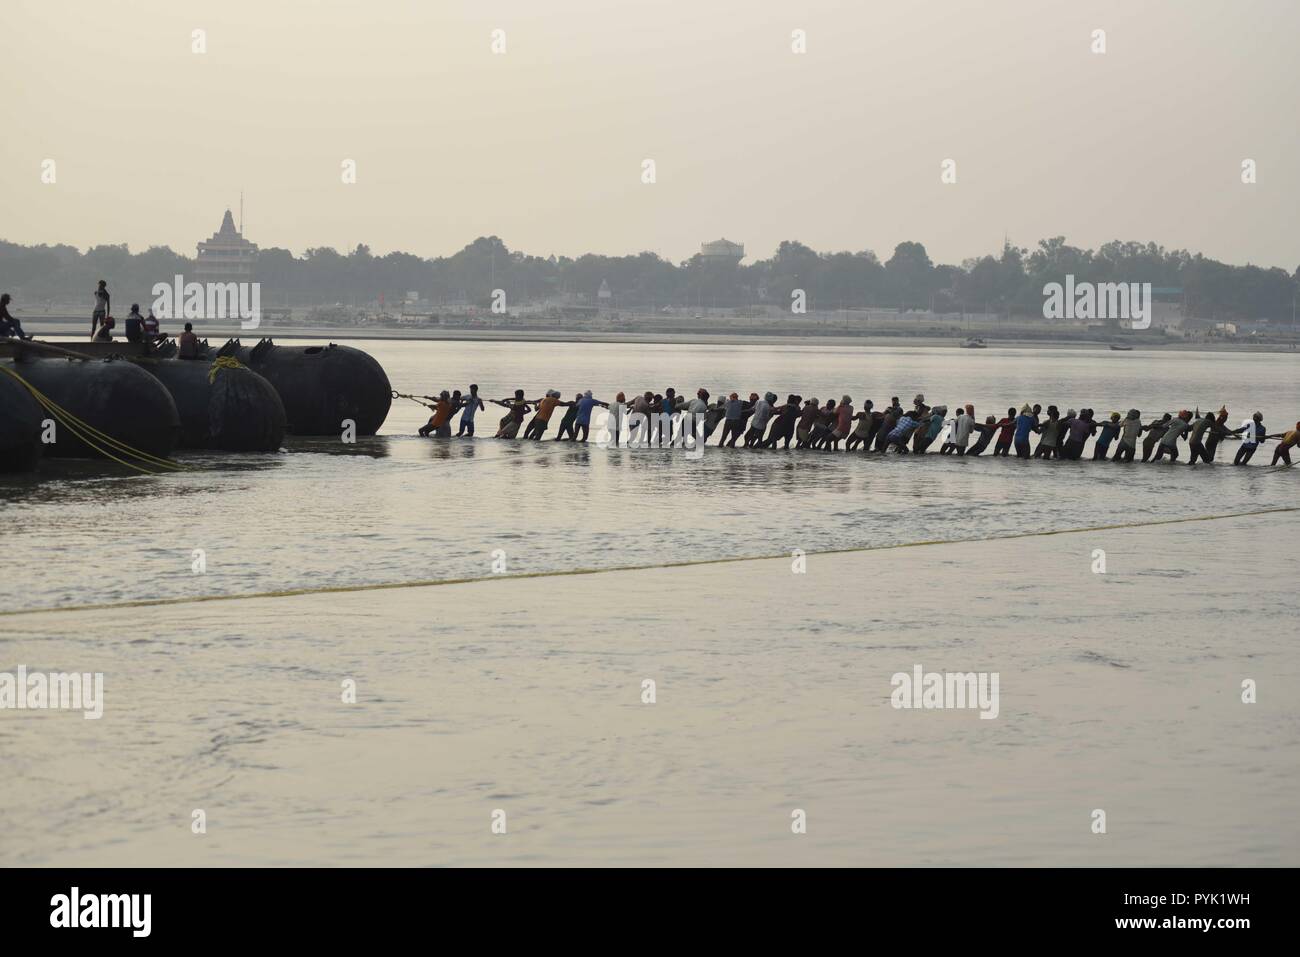 Allahabad, Uttar Pradesh, India. 28th Oct, 2018. Allahabad-Uttar Pradesh/India, 28-10-2018: Indian labourers make a temporary Pantoon Tank bridge over Ganges River for upcoming Kumbh Mela Festival in Allahabad, now renamed as PrayagRaj on October 28, 2018 . he Kumbh Mela in the town of Allahabad will see milliond of Hindu devotees gather from January 15, 2019 to March 4, 2019 to take a ritual bath in the holy waters, believed to cleanse sins and bestow blessings. Credit: Prabhat Kumar Verma/ZUMA Wire/Alamy Live News Stock Photo